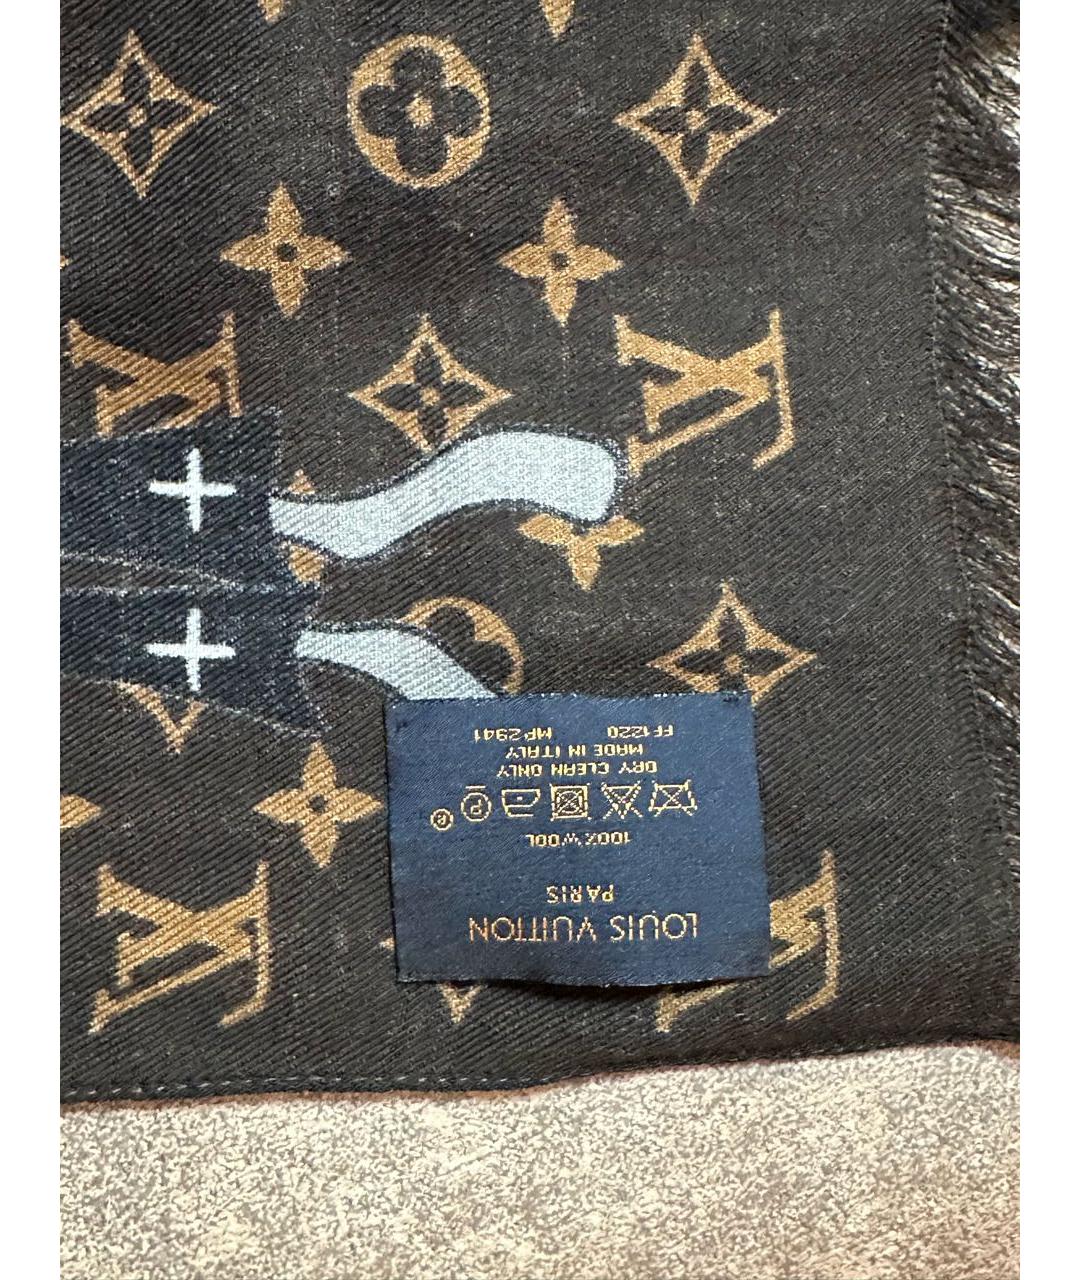 LOUIS VUITTON PRE-OWNED Мульти шерстяной шарф, фото 3